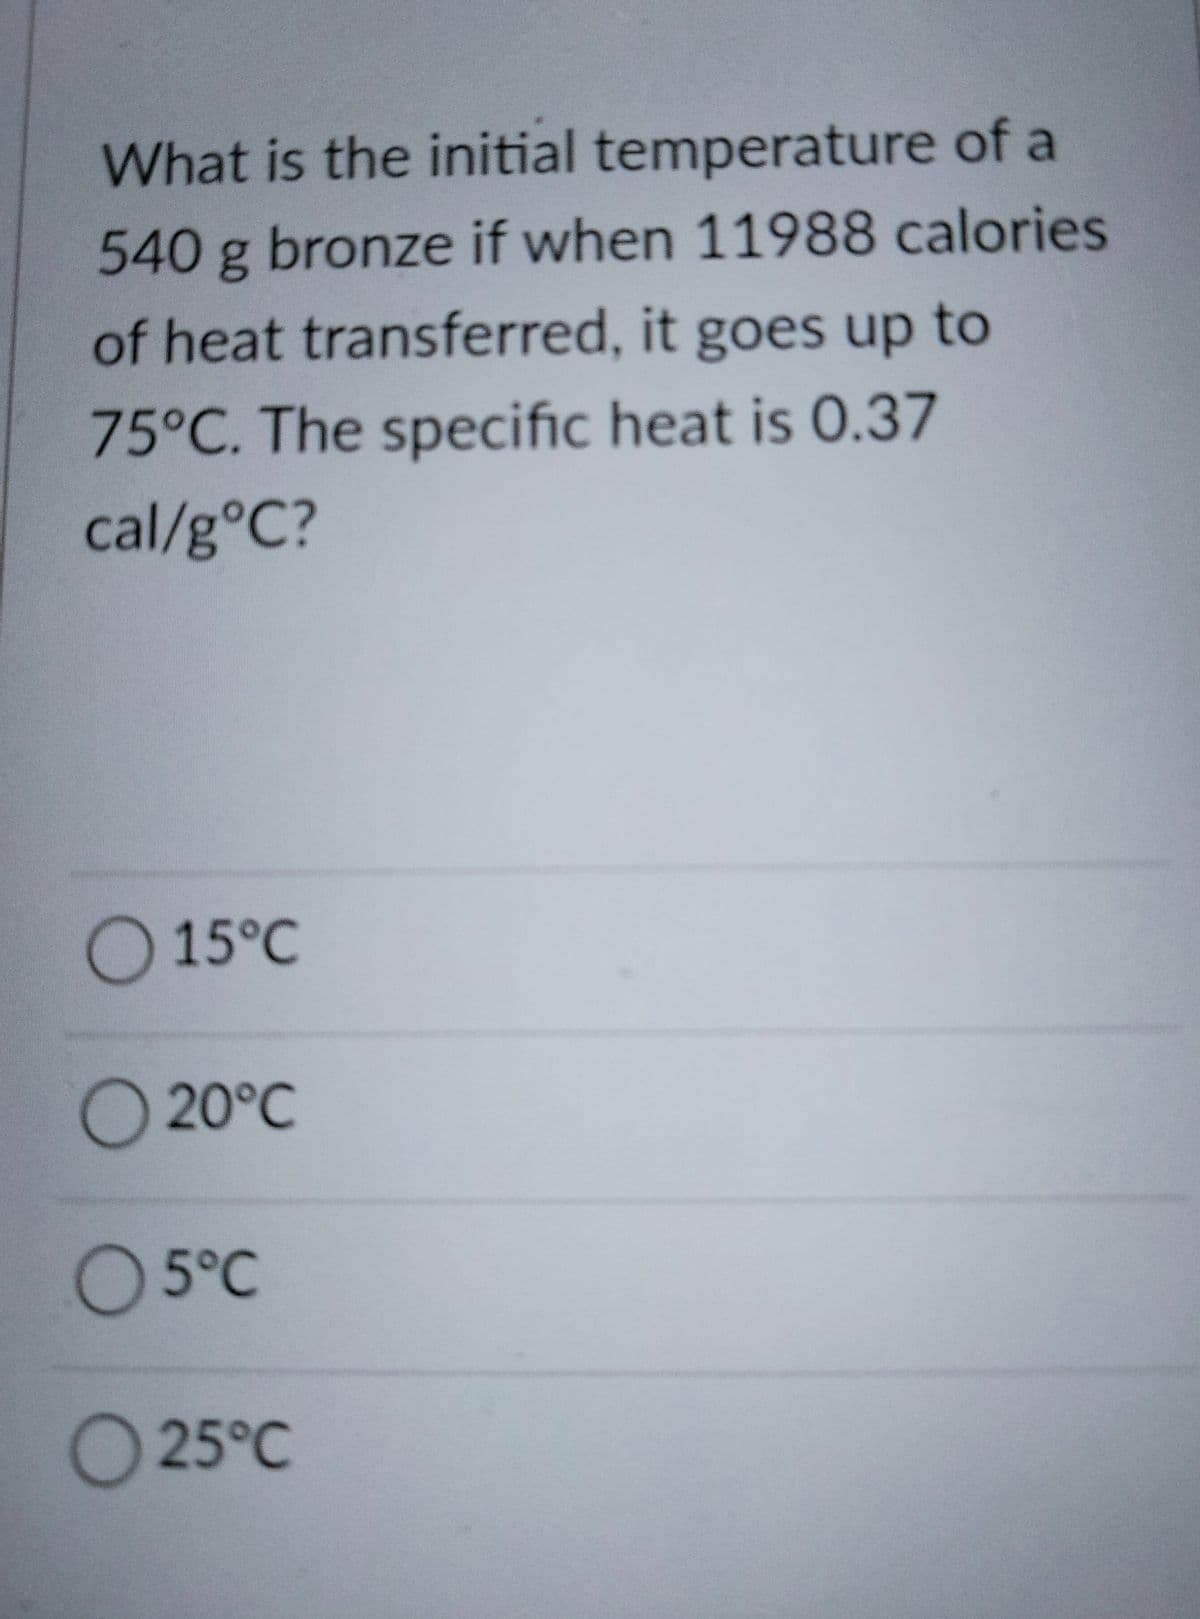 What is the initial temperature of a
540 g bronze if when 11988 calories
of heat transferred, it goes up to
75°C. The specific heat is 0.37
cal/g°C?
O 15°C
O 20°C
O 5°C
O25°C
